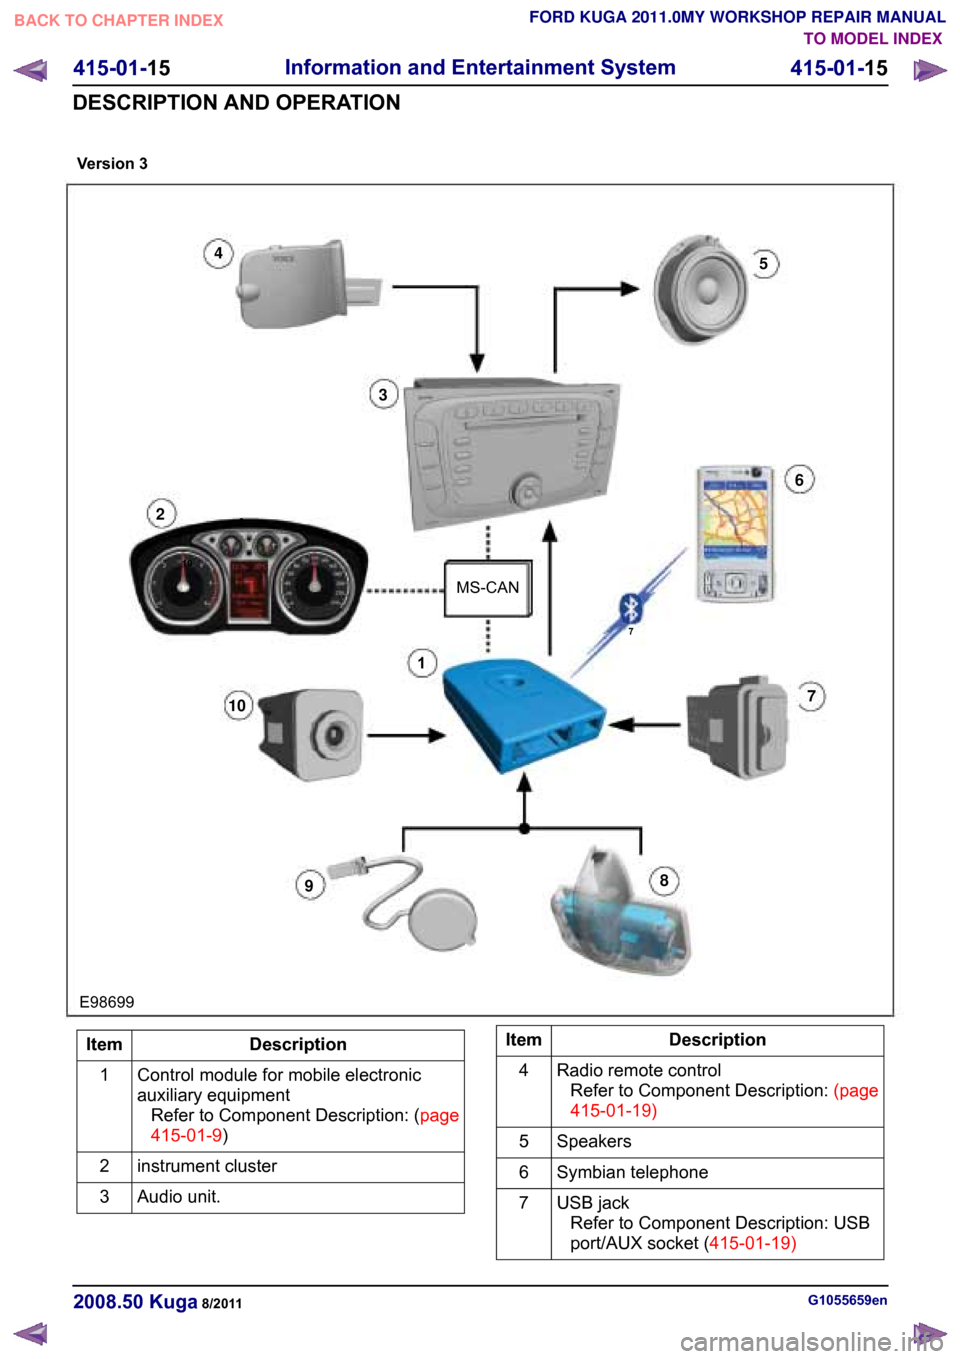 FORD KUGA 2011 1.G Workshop Manual TO MODEL INDEX
BACK TO CHAPTER INDEX
FORD KUGA 2011.0MY WORKSHOP REPAIR MANUAL
415-01-19
 Description
Item
Control module for mobile electronic
auxiliary equipmentRefertoComponentDescription:(page
415